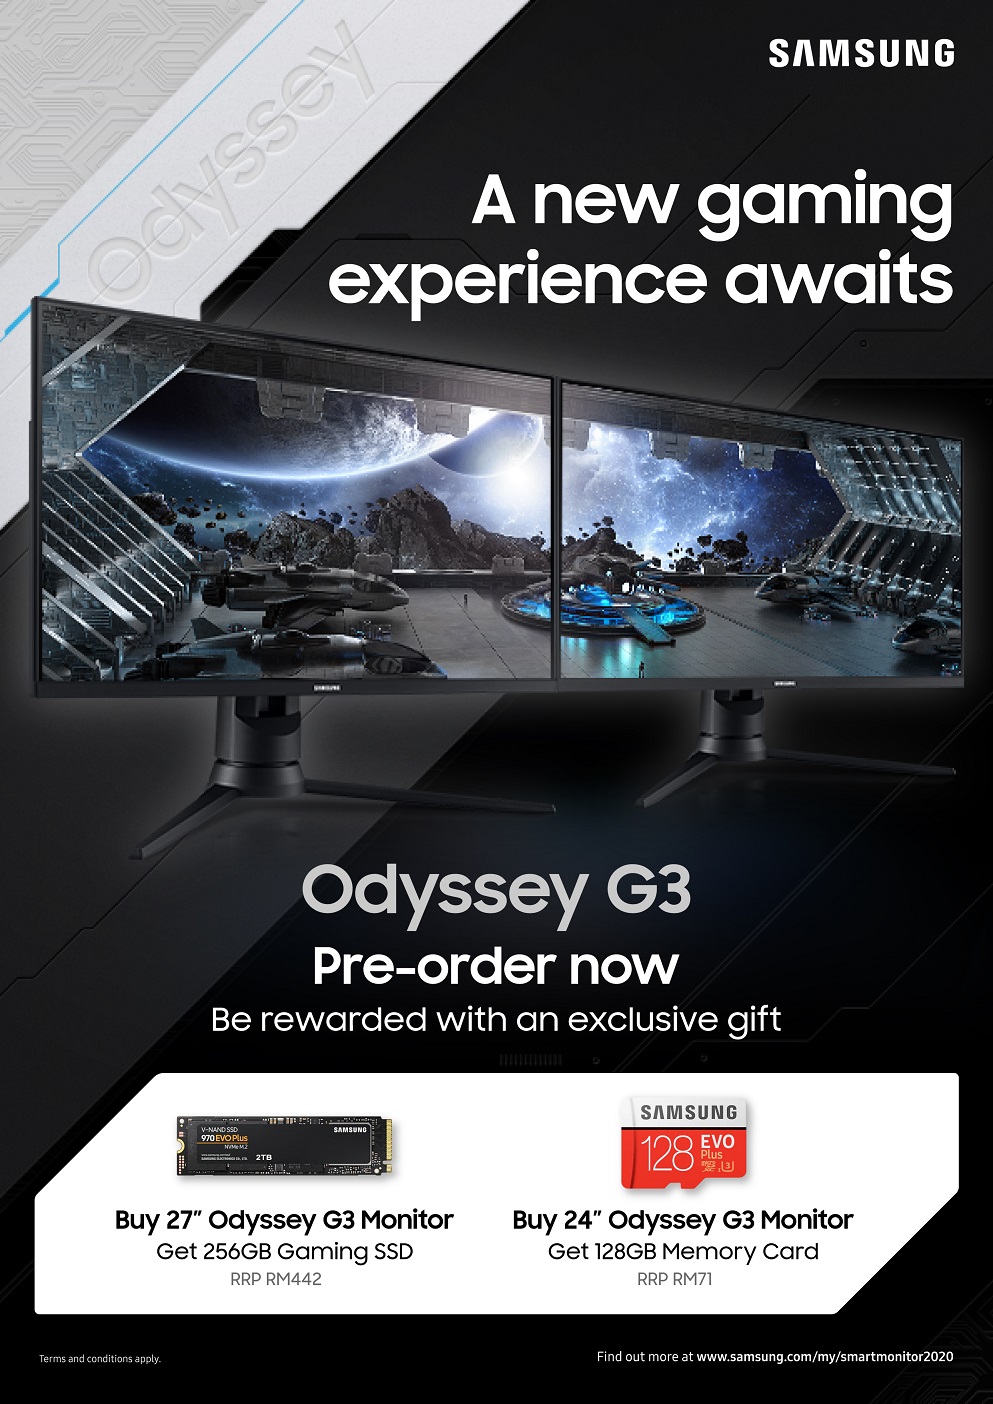 Samsung Odyssey G3 Monitor Is Now Available for Online Pre Order